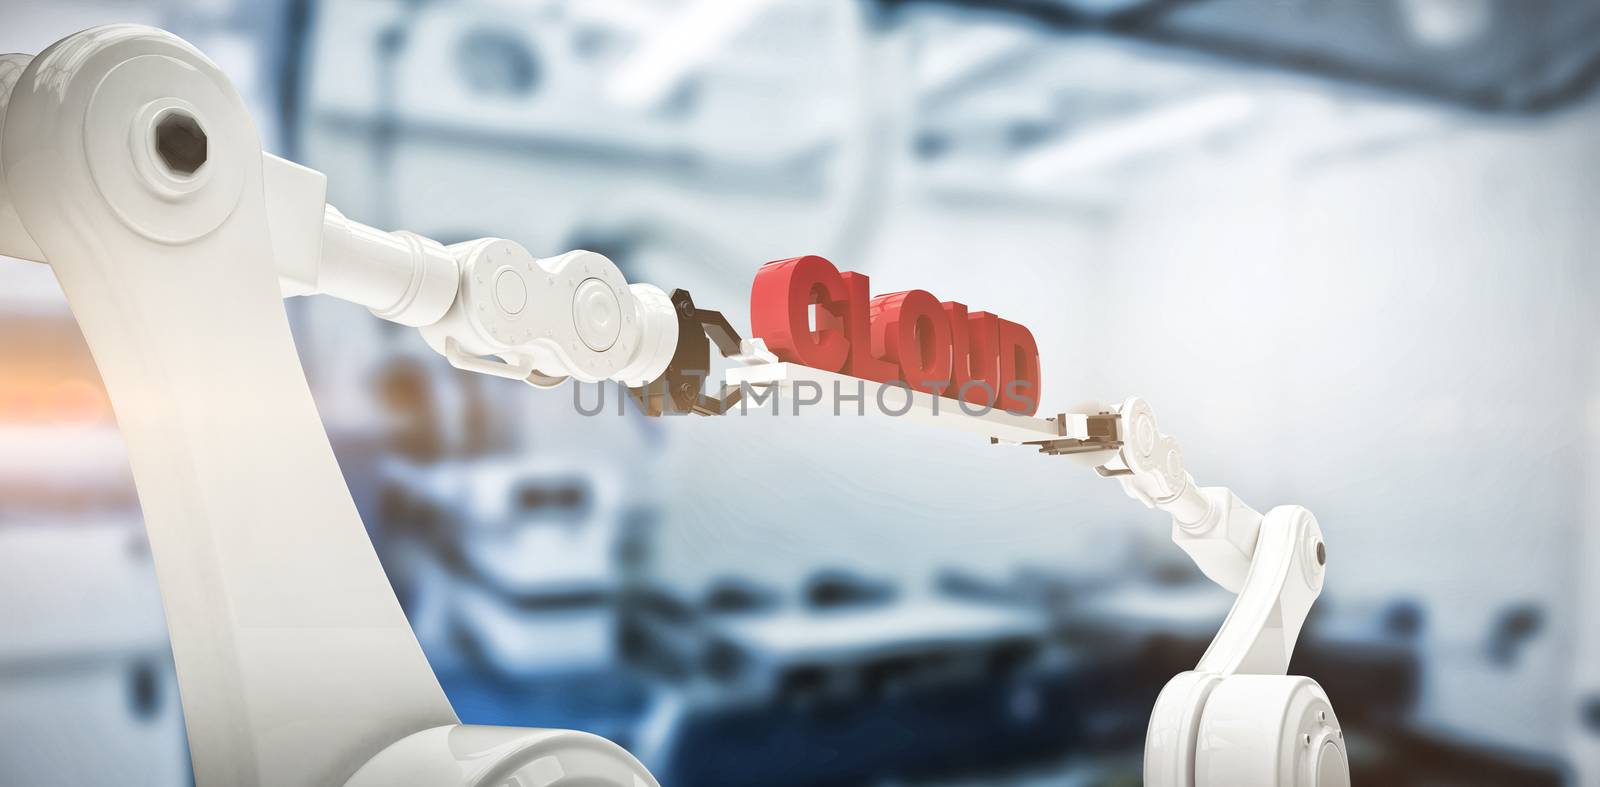 Composite image of mechanical robotic hands holding cloud text by Wavebreakmedia